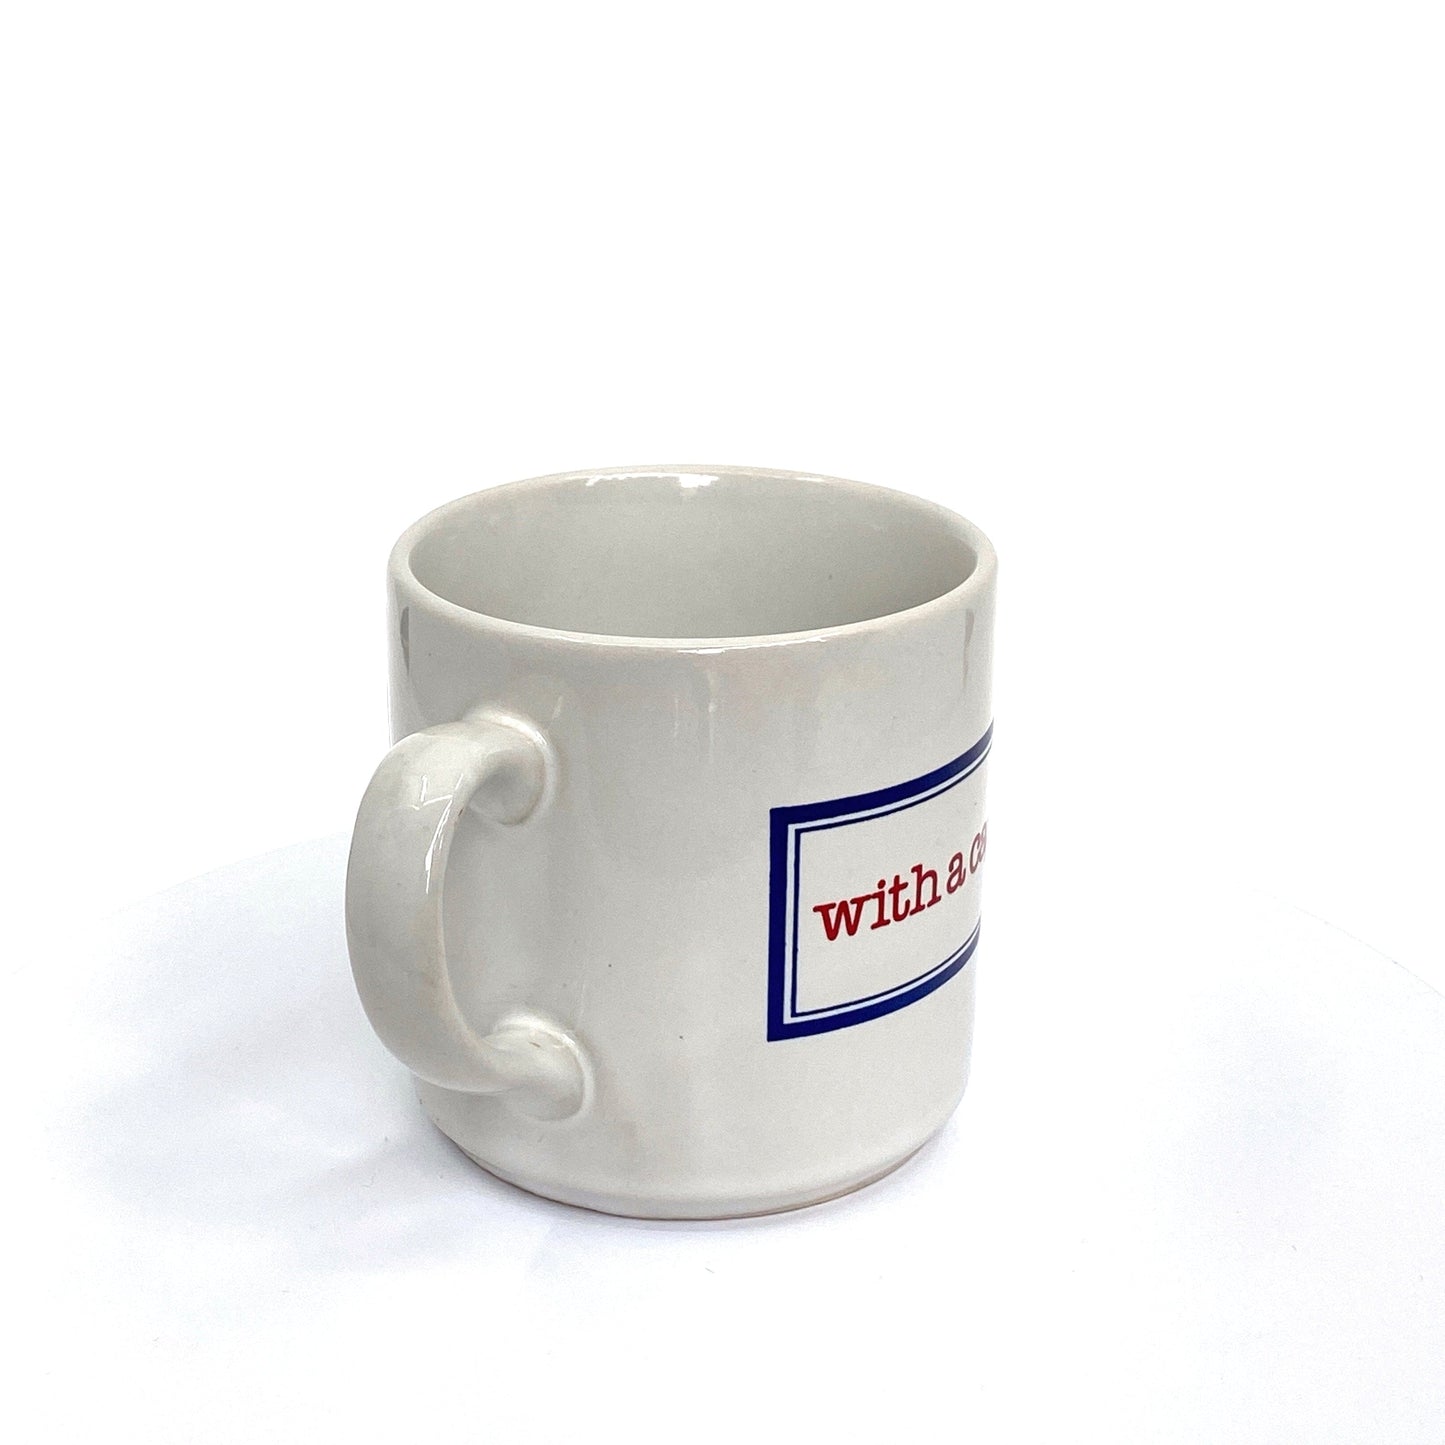 ‘Debbie with a capital D’ White Ceramic Personalized Coffee Cup 14 Fl Oz